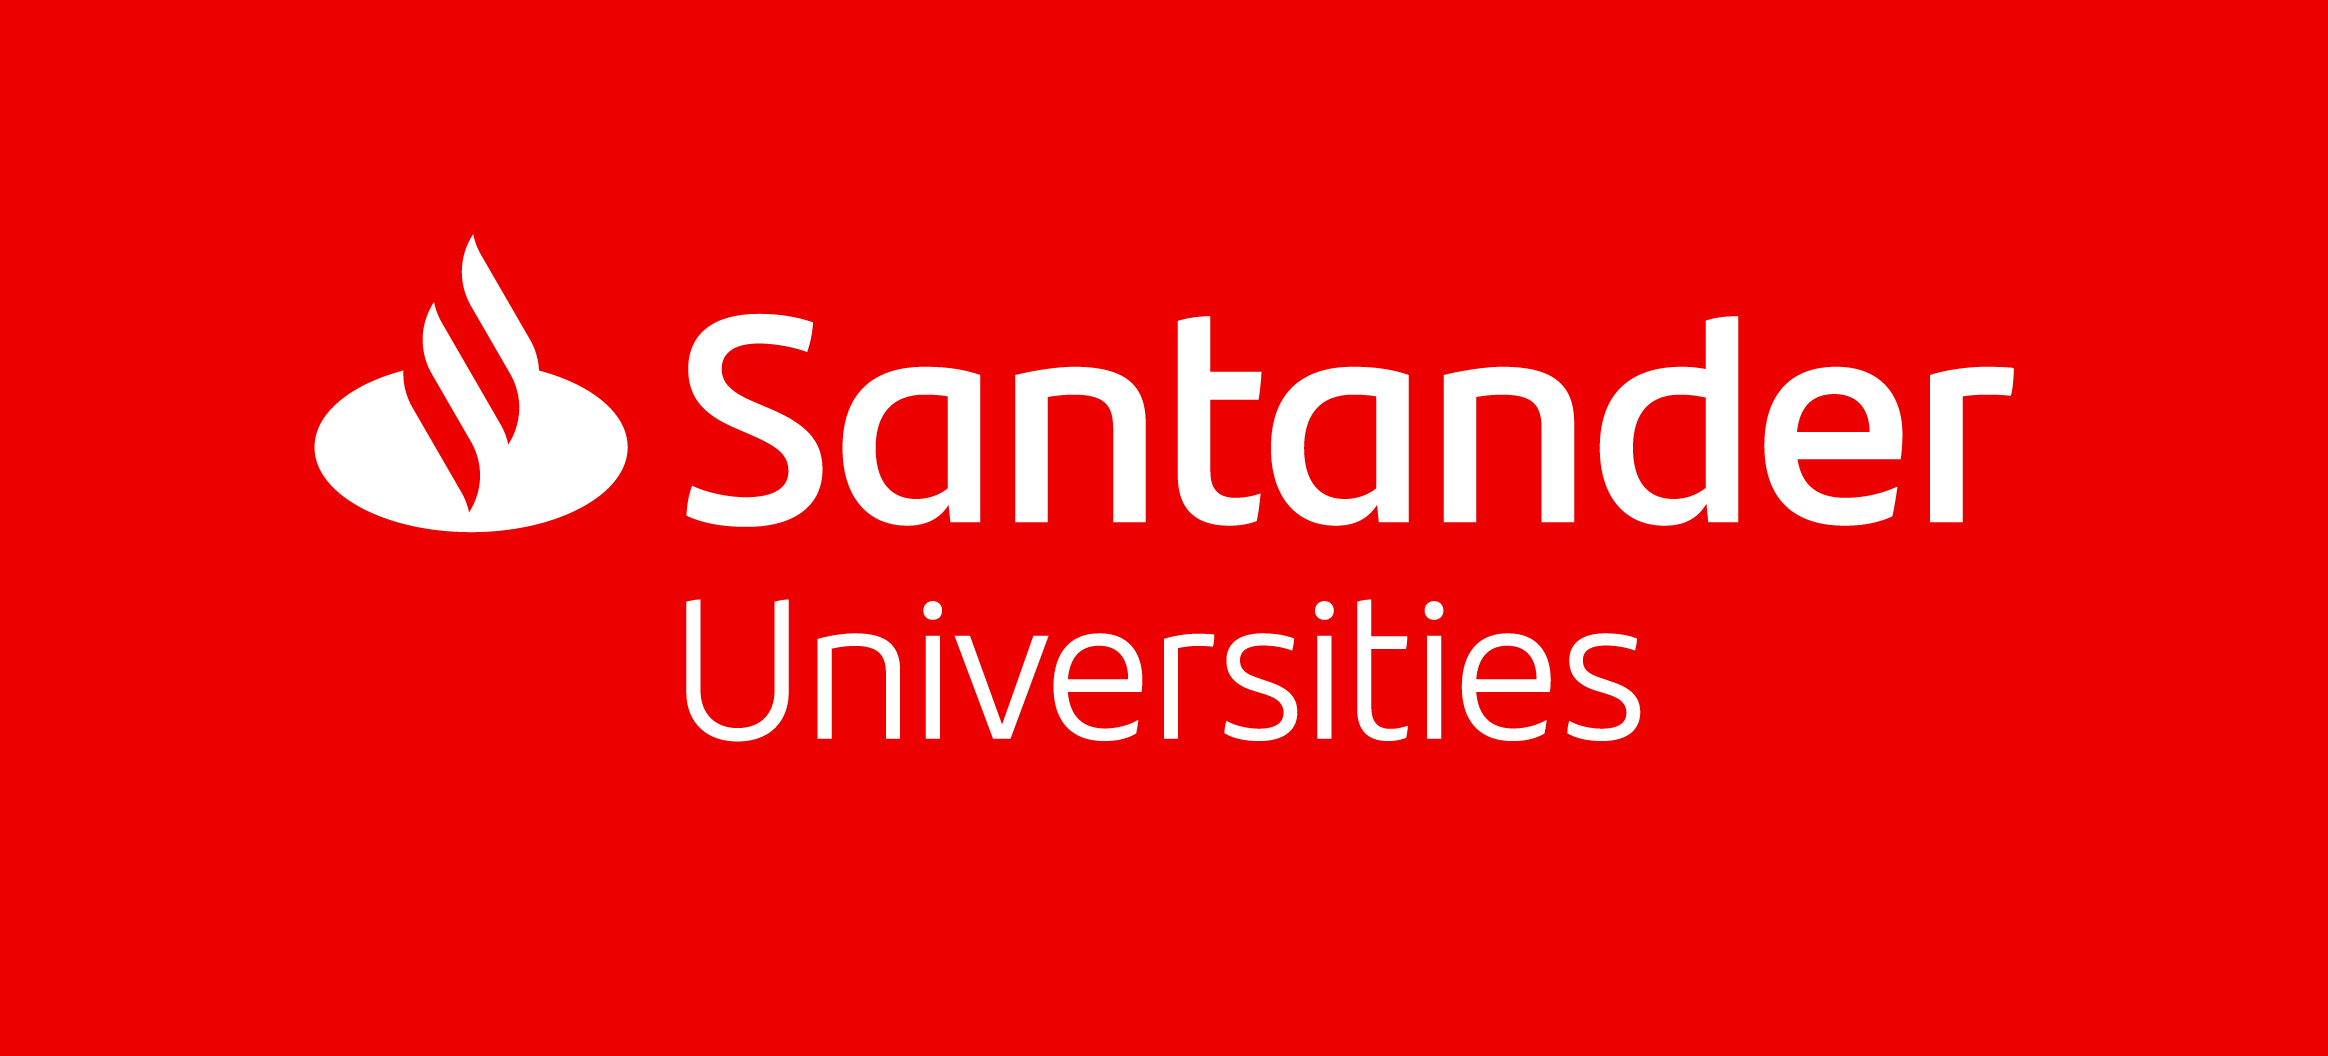 The red and white logo for the Santander Universities initiative